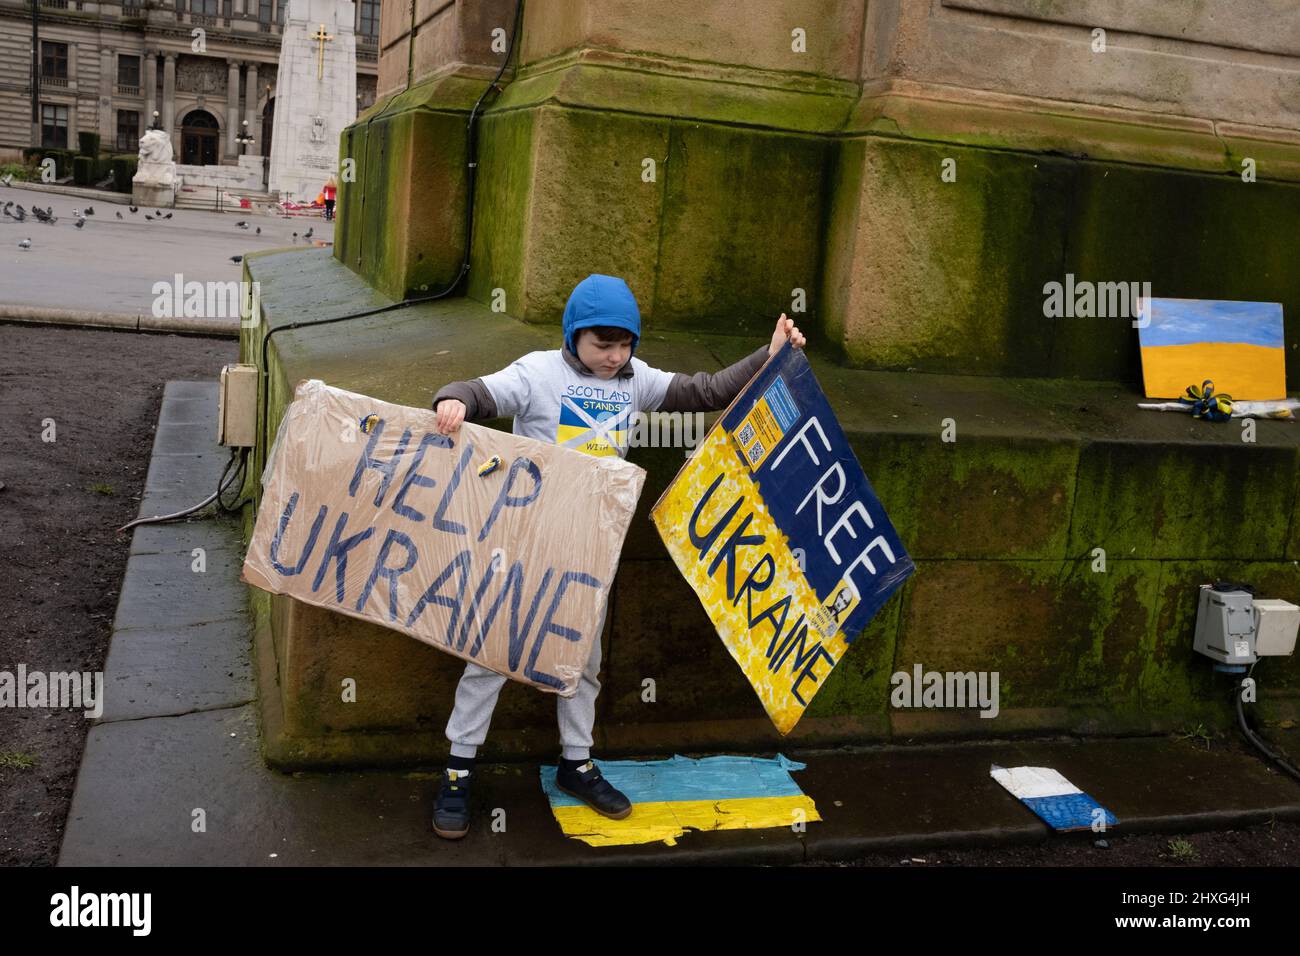 Glasgow, UK, 12 March 2022. Stand With Ukraine rally in George Square, showing support for Ukraine in their current war with President PutinÕs Russia, in Glasgow, Scotland, 12 March 2022. Photo credit: Jeremy Sutton-Hibbert/ Alamy Live News. Stock Photo